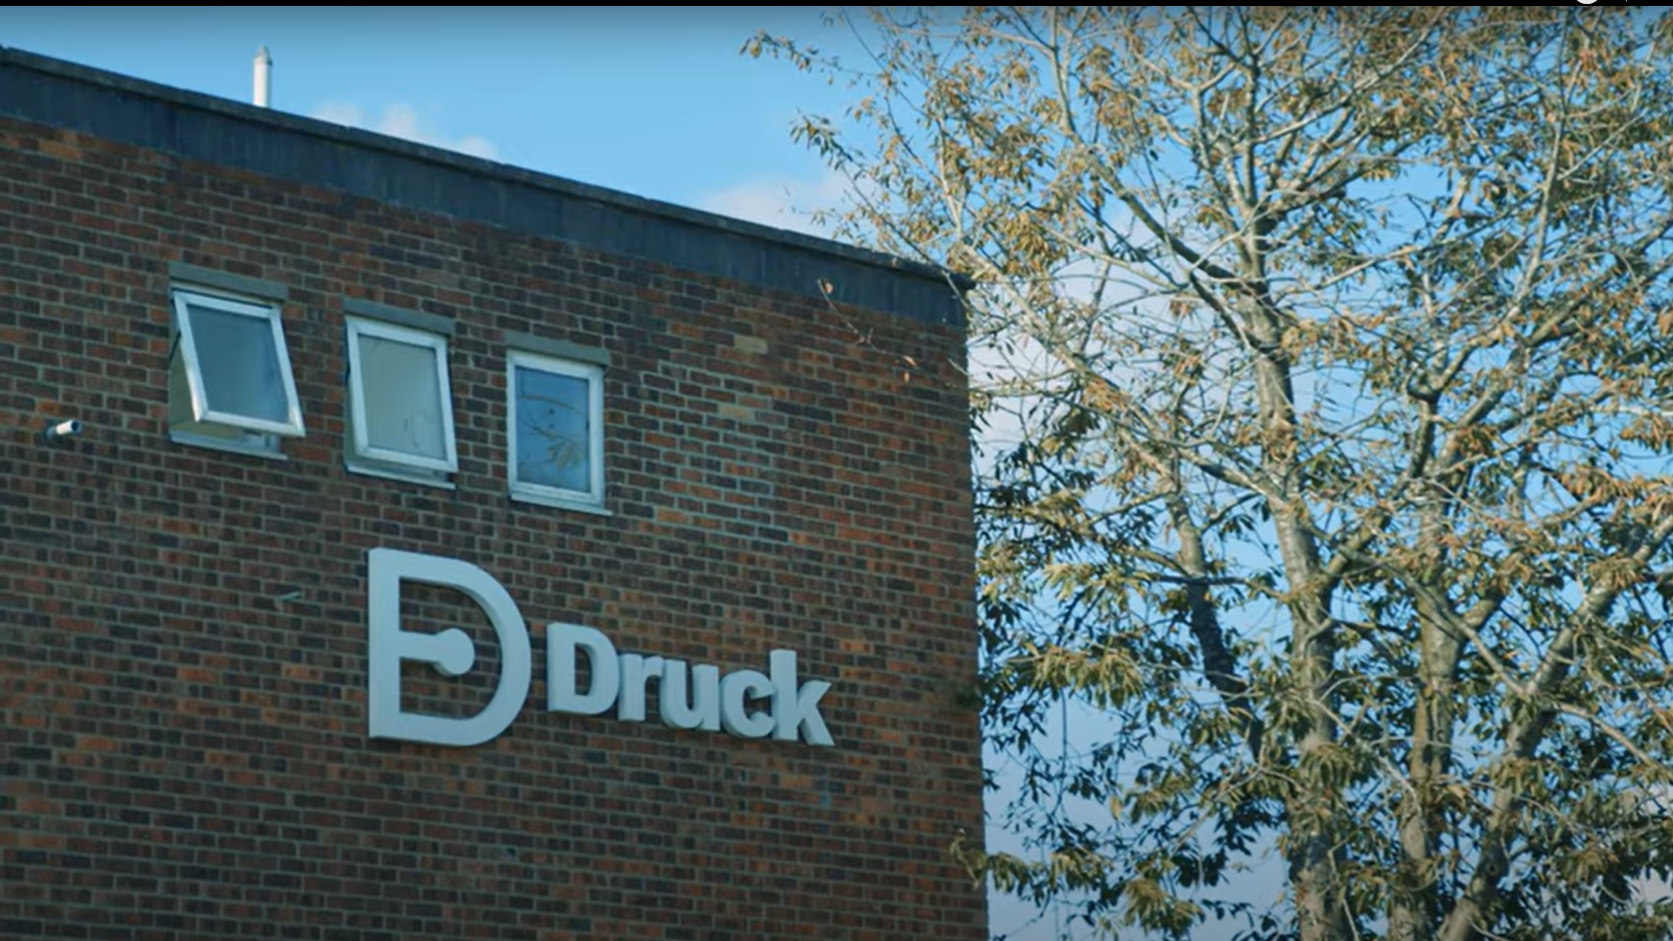 About Druck